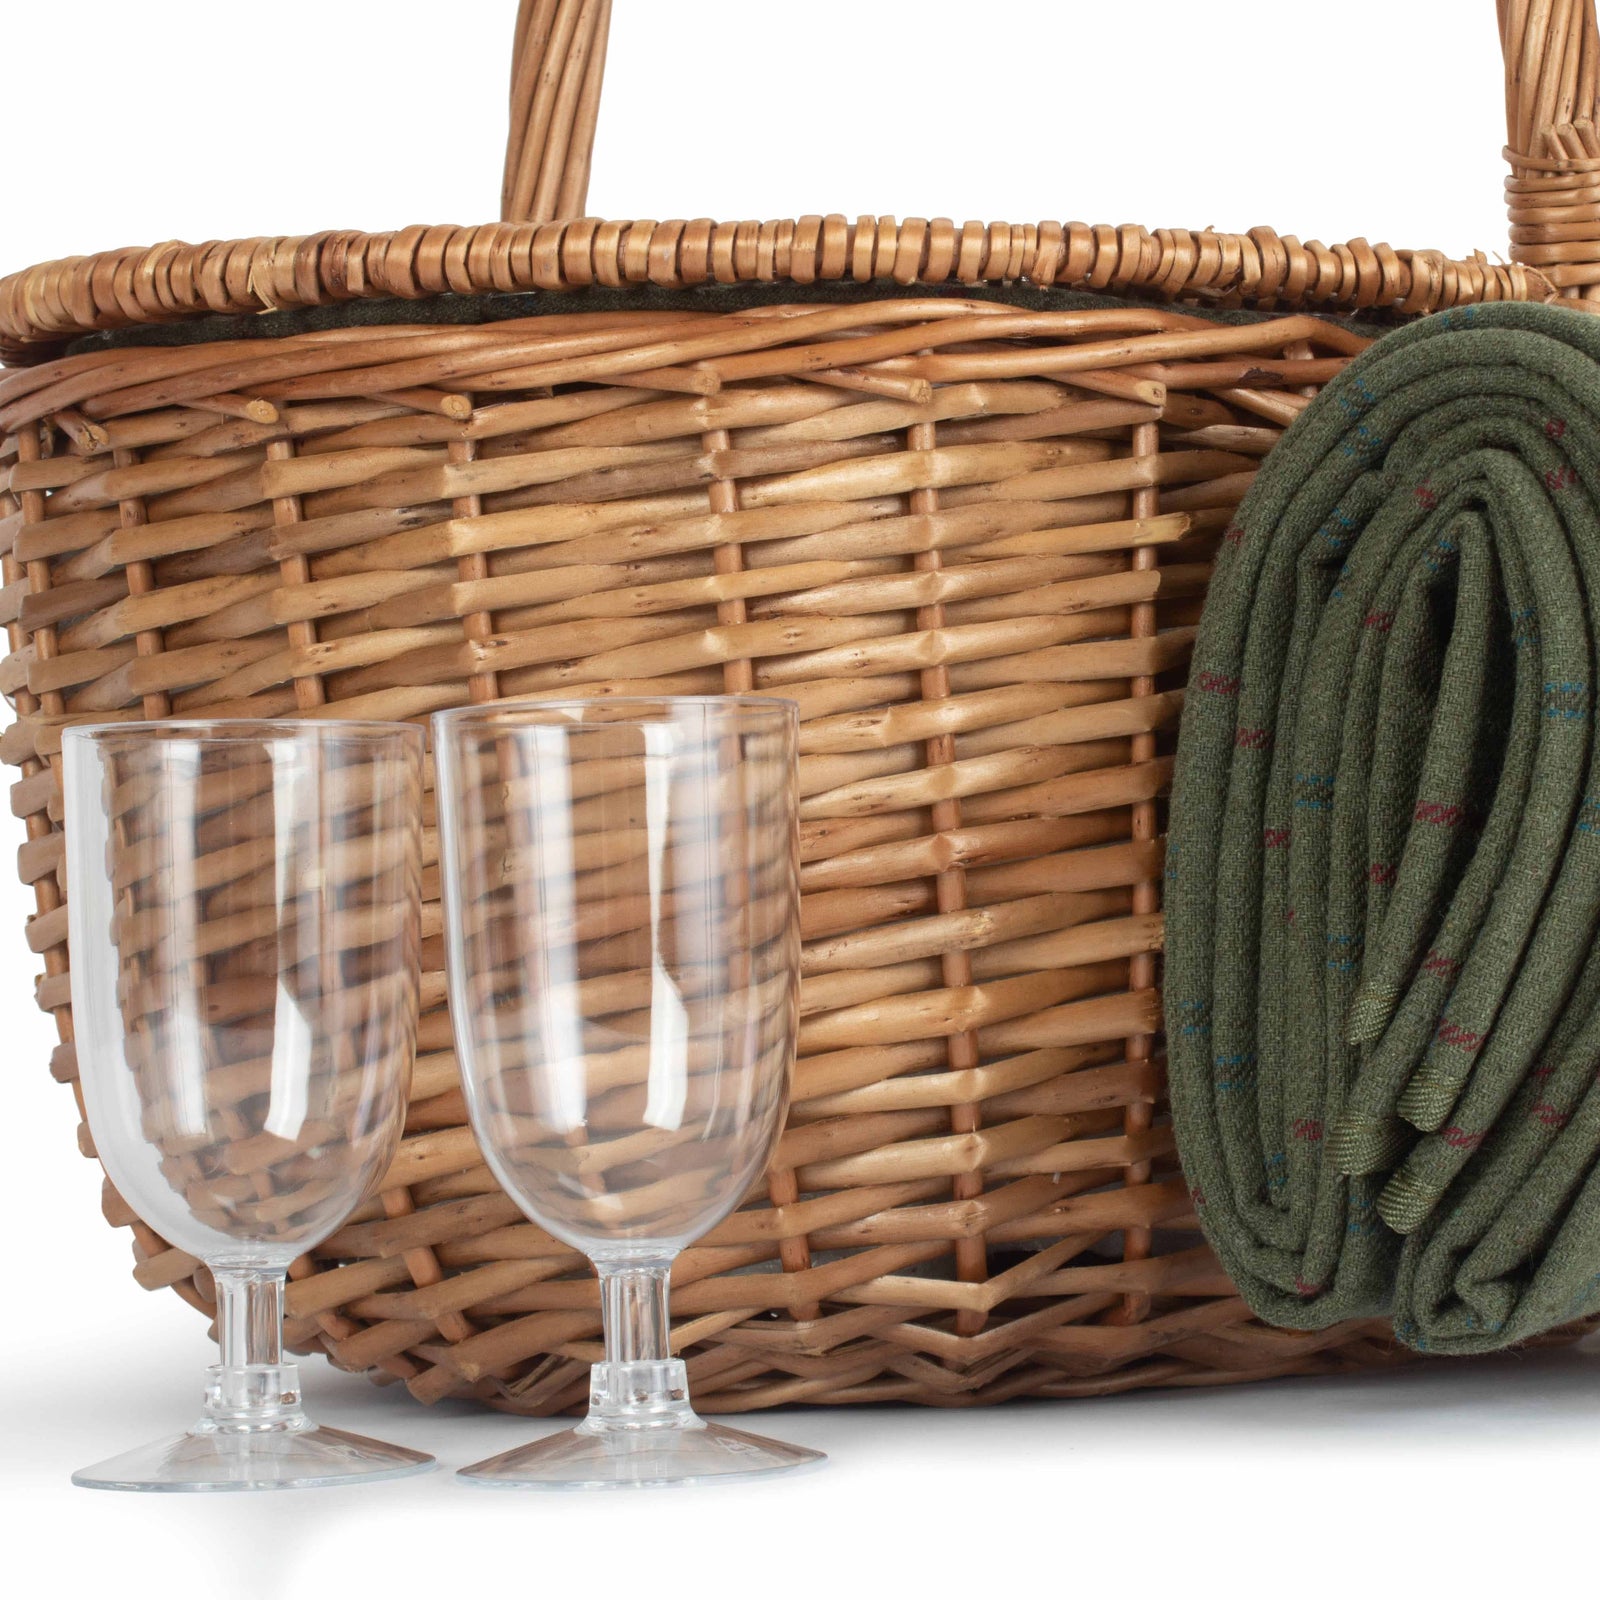 Red Hamper Oval Double Steamed 2 Person Fitted Picnic Wicker Basket